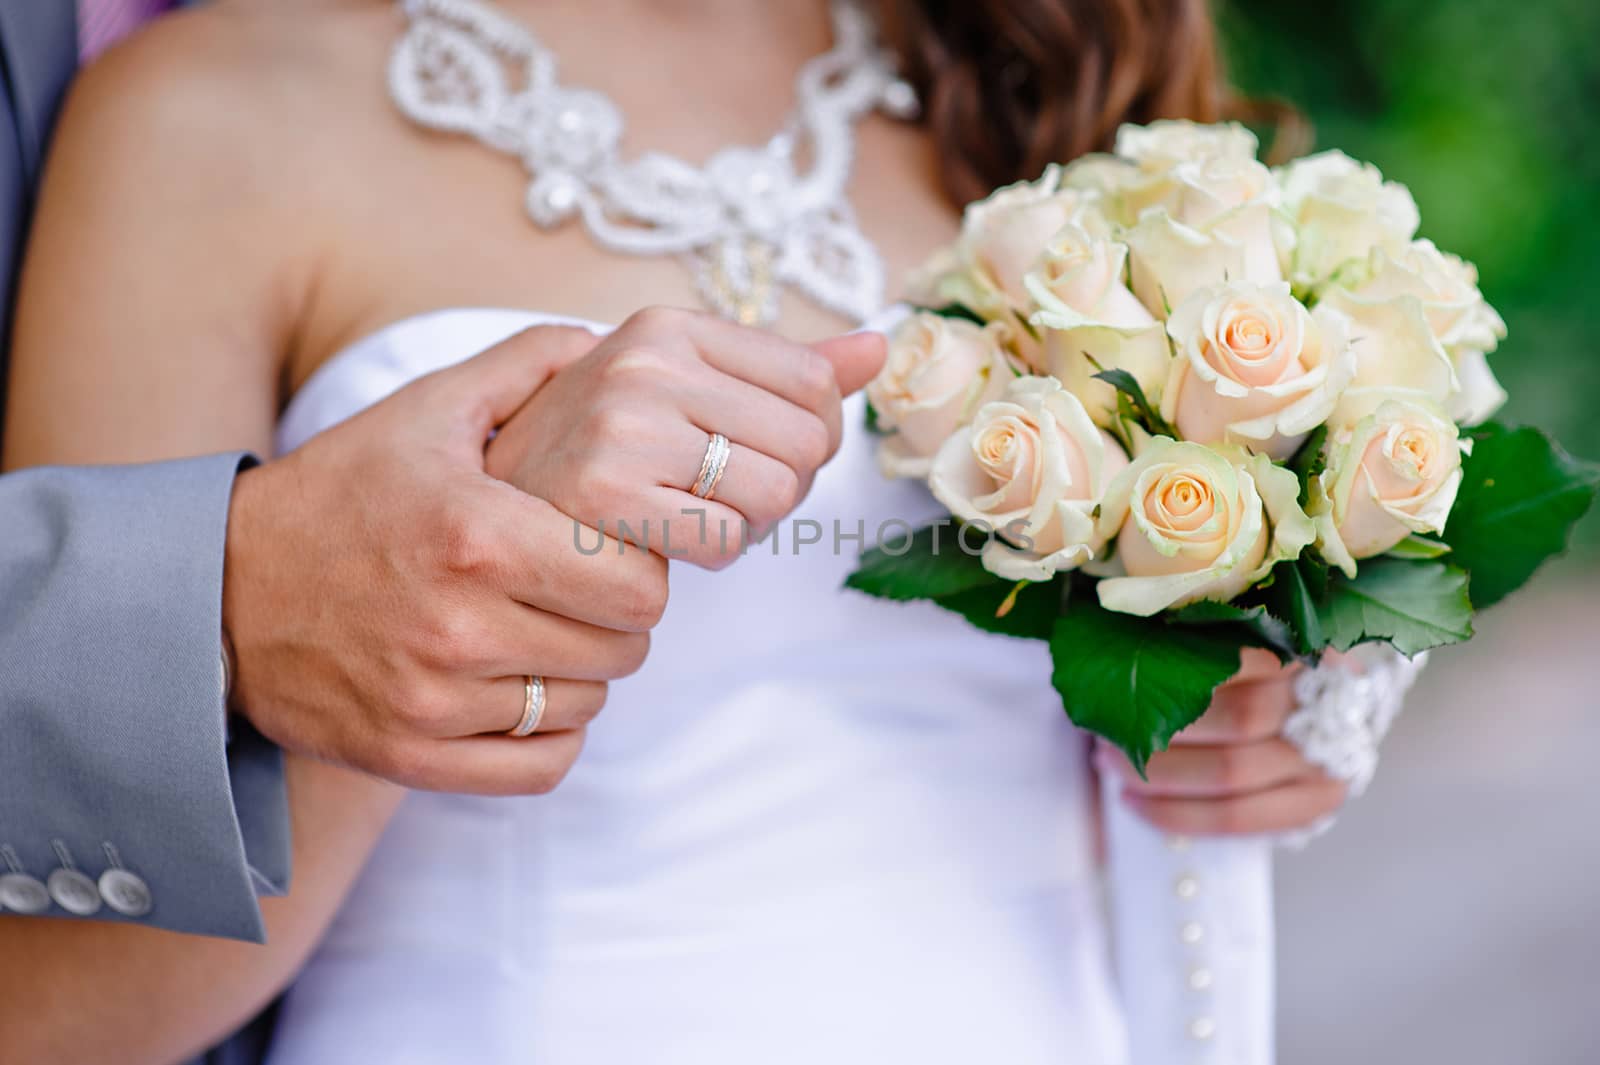 Hands and rings and wedding bouquet by timonko